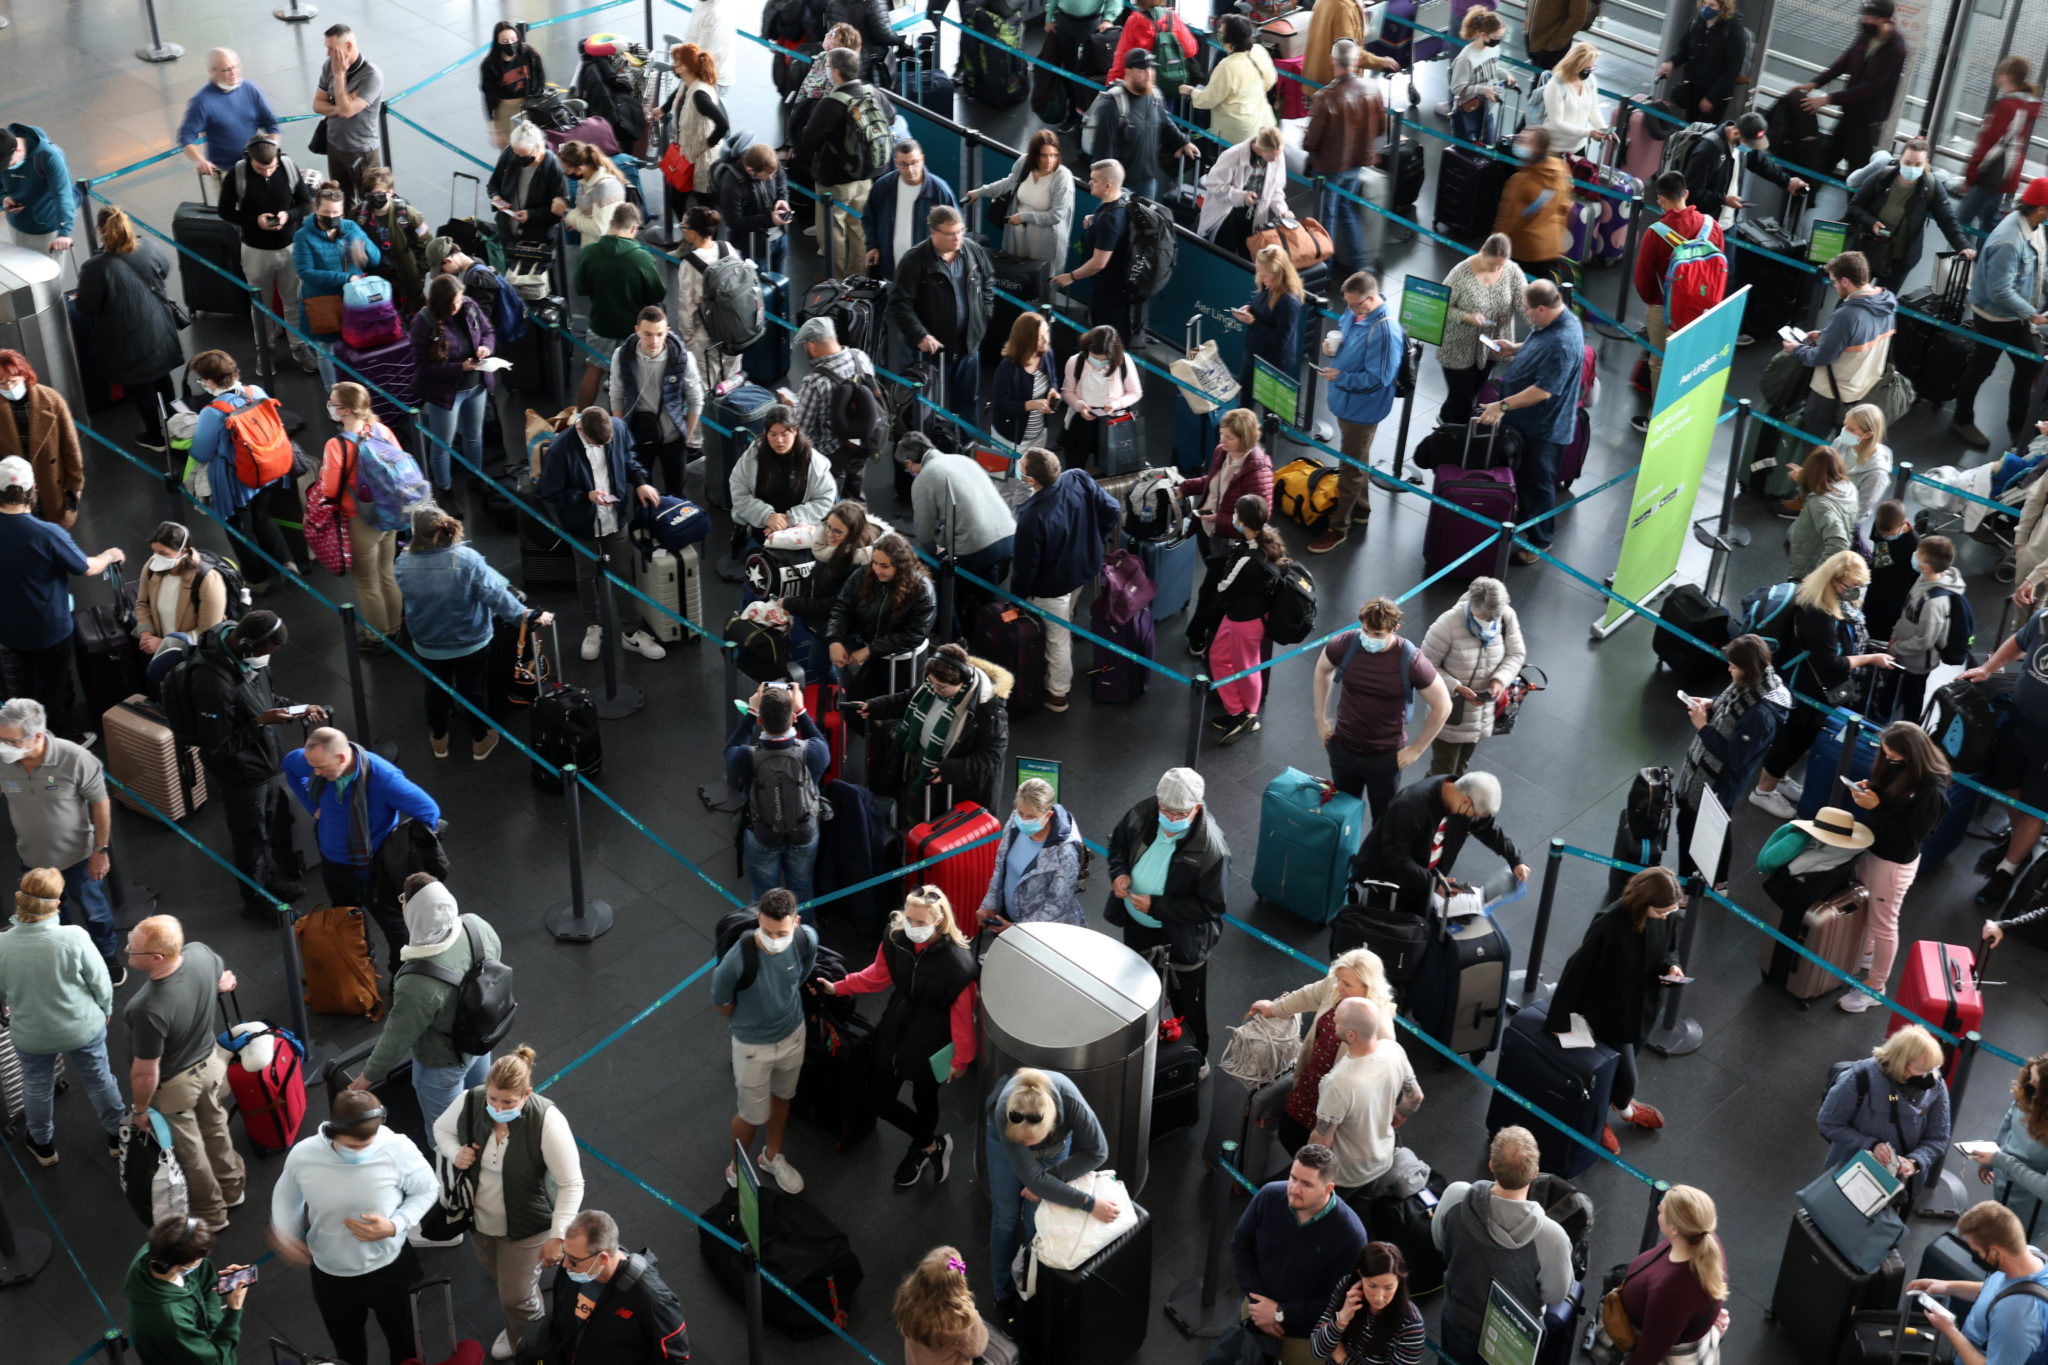 File photo of Dublin Airport on Easter weekend, 16-04-2022. Image: Sam Boal/RollingNews